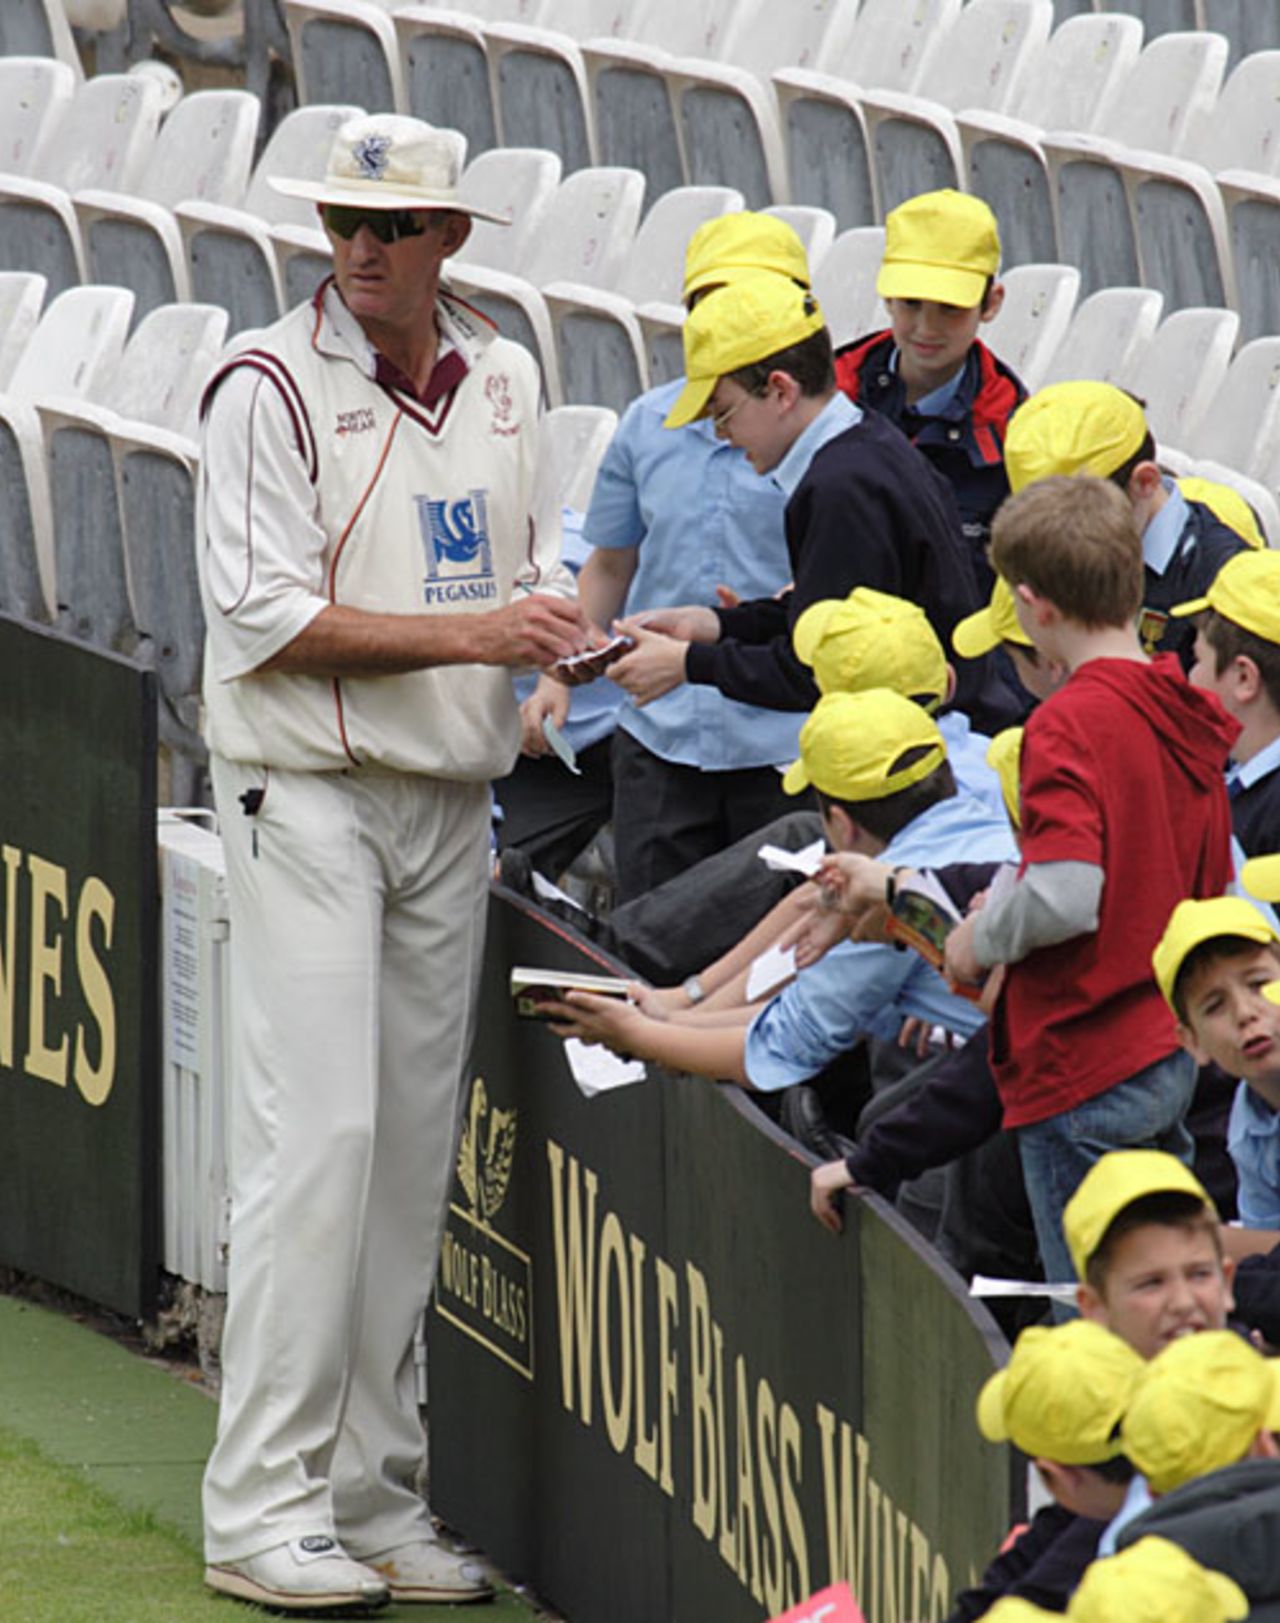 Andy Caddick obliges young fans, Middlesex v Somerset, Lord's, May 31, 2007